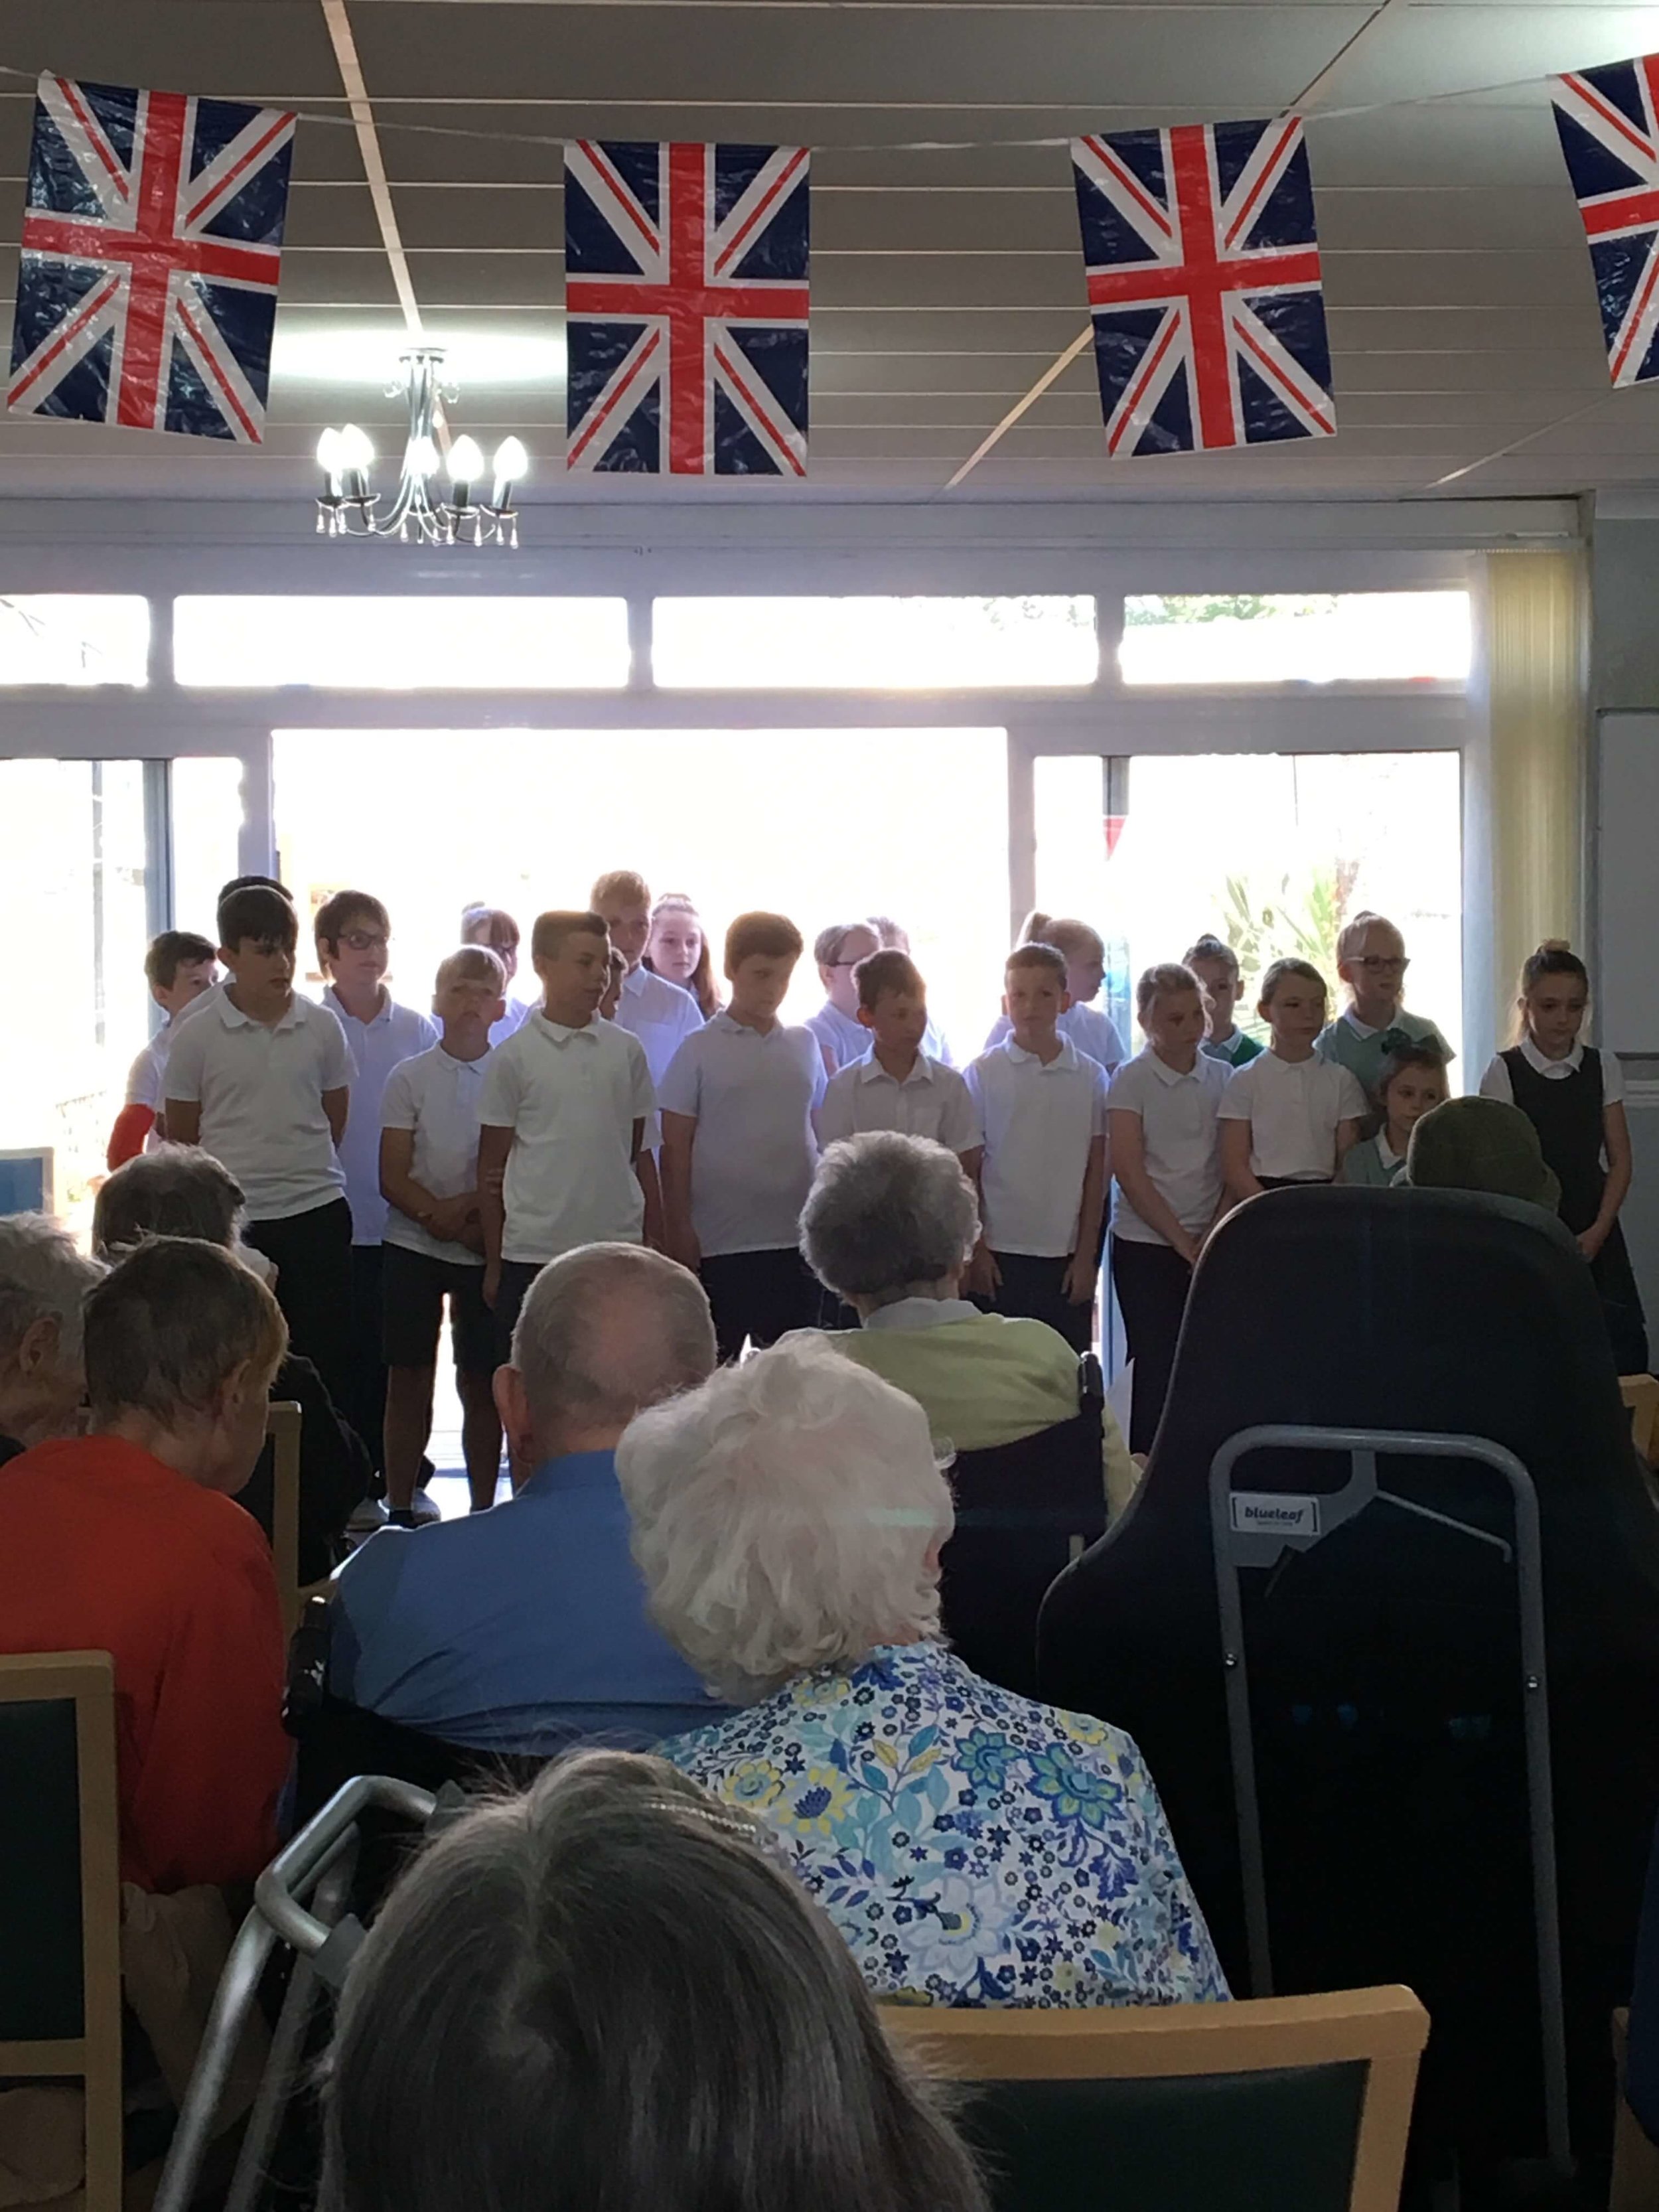 sing off at spring field open day.jpg